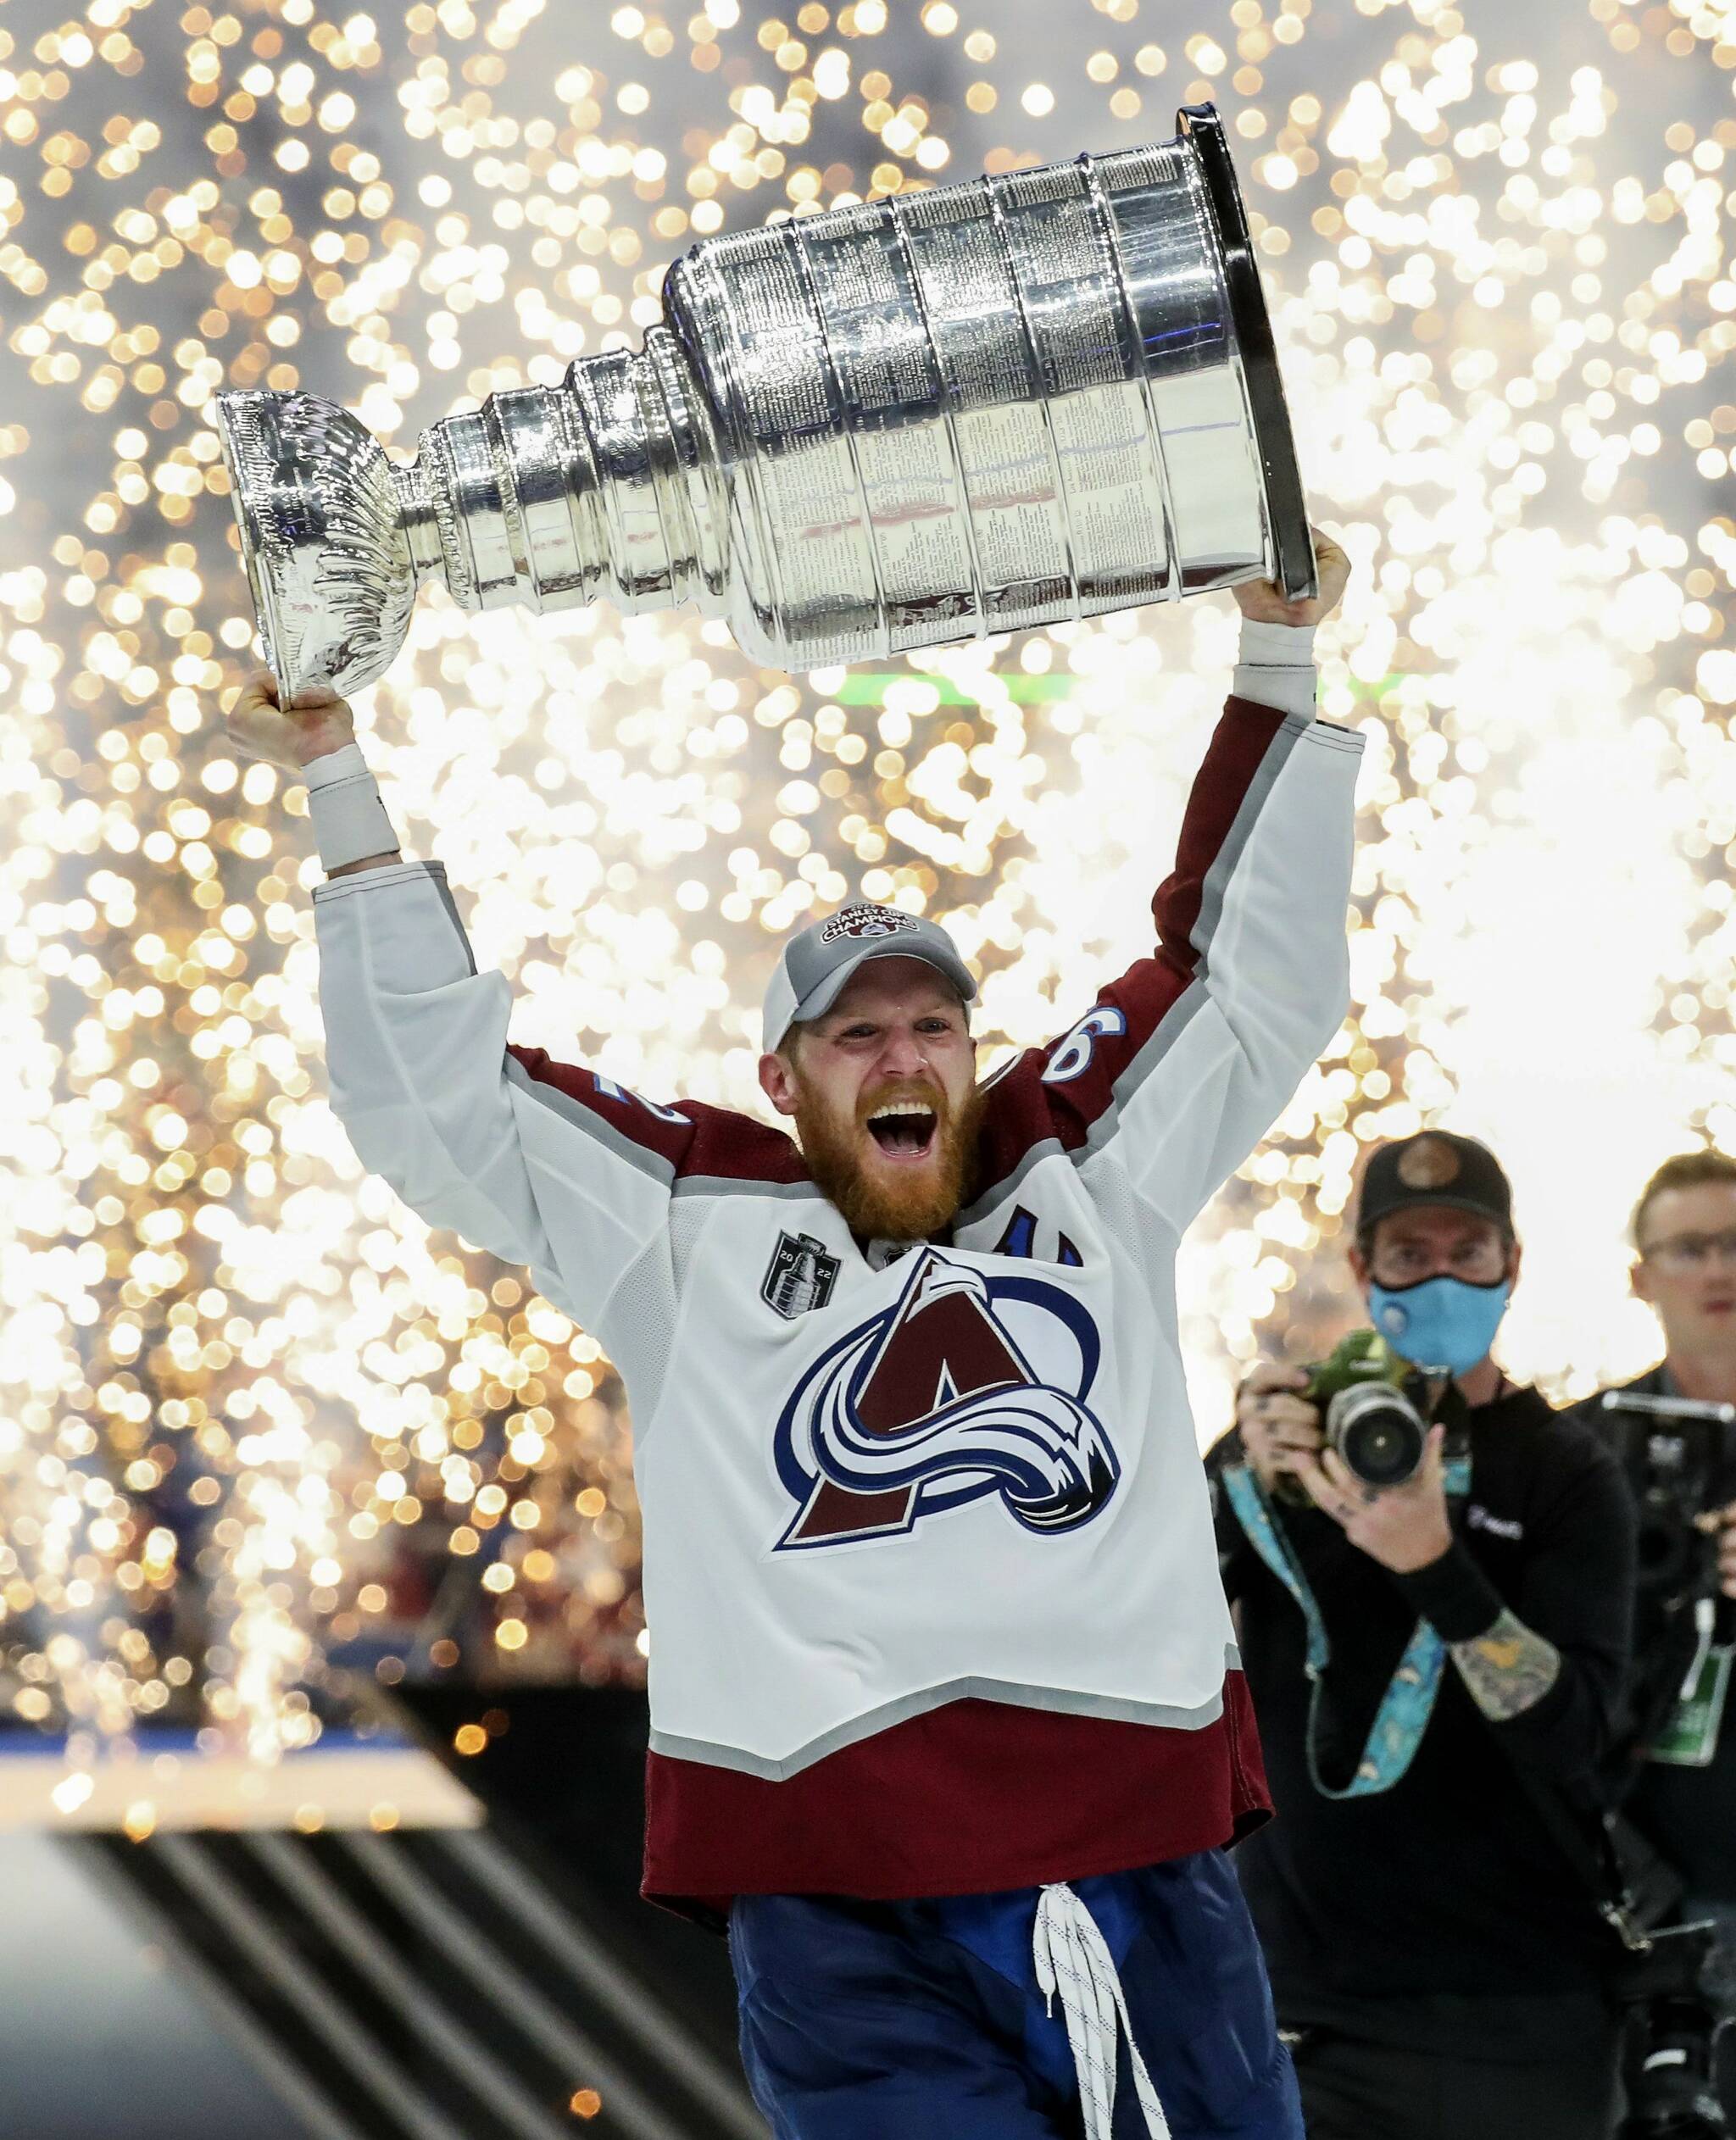 Colorado Avalanche left wing Gabriel Landeskog (92) holds the Stanley Cup after the Avalanche defeated the Tampa Bay Lightning 2-1 in Game 6 of the NHL hockey Stanley Cup Finals on Sunday in Tampa, Fla. (Dirk Shadd/Tampa Bay Times via AP)